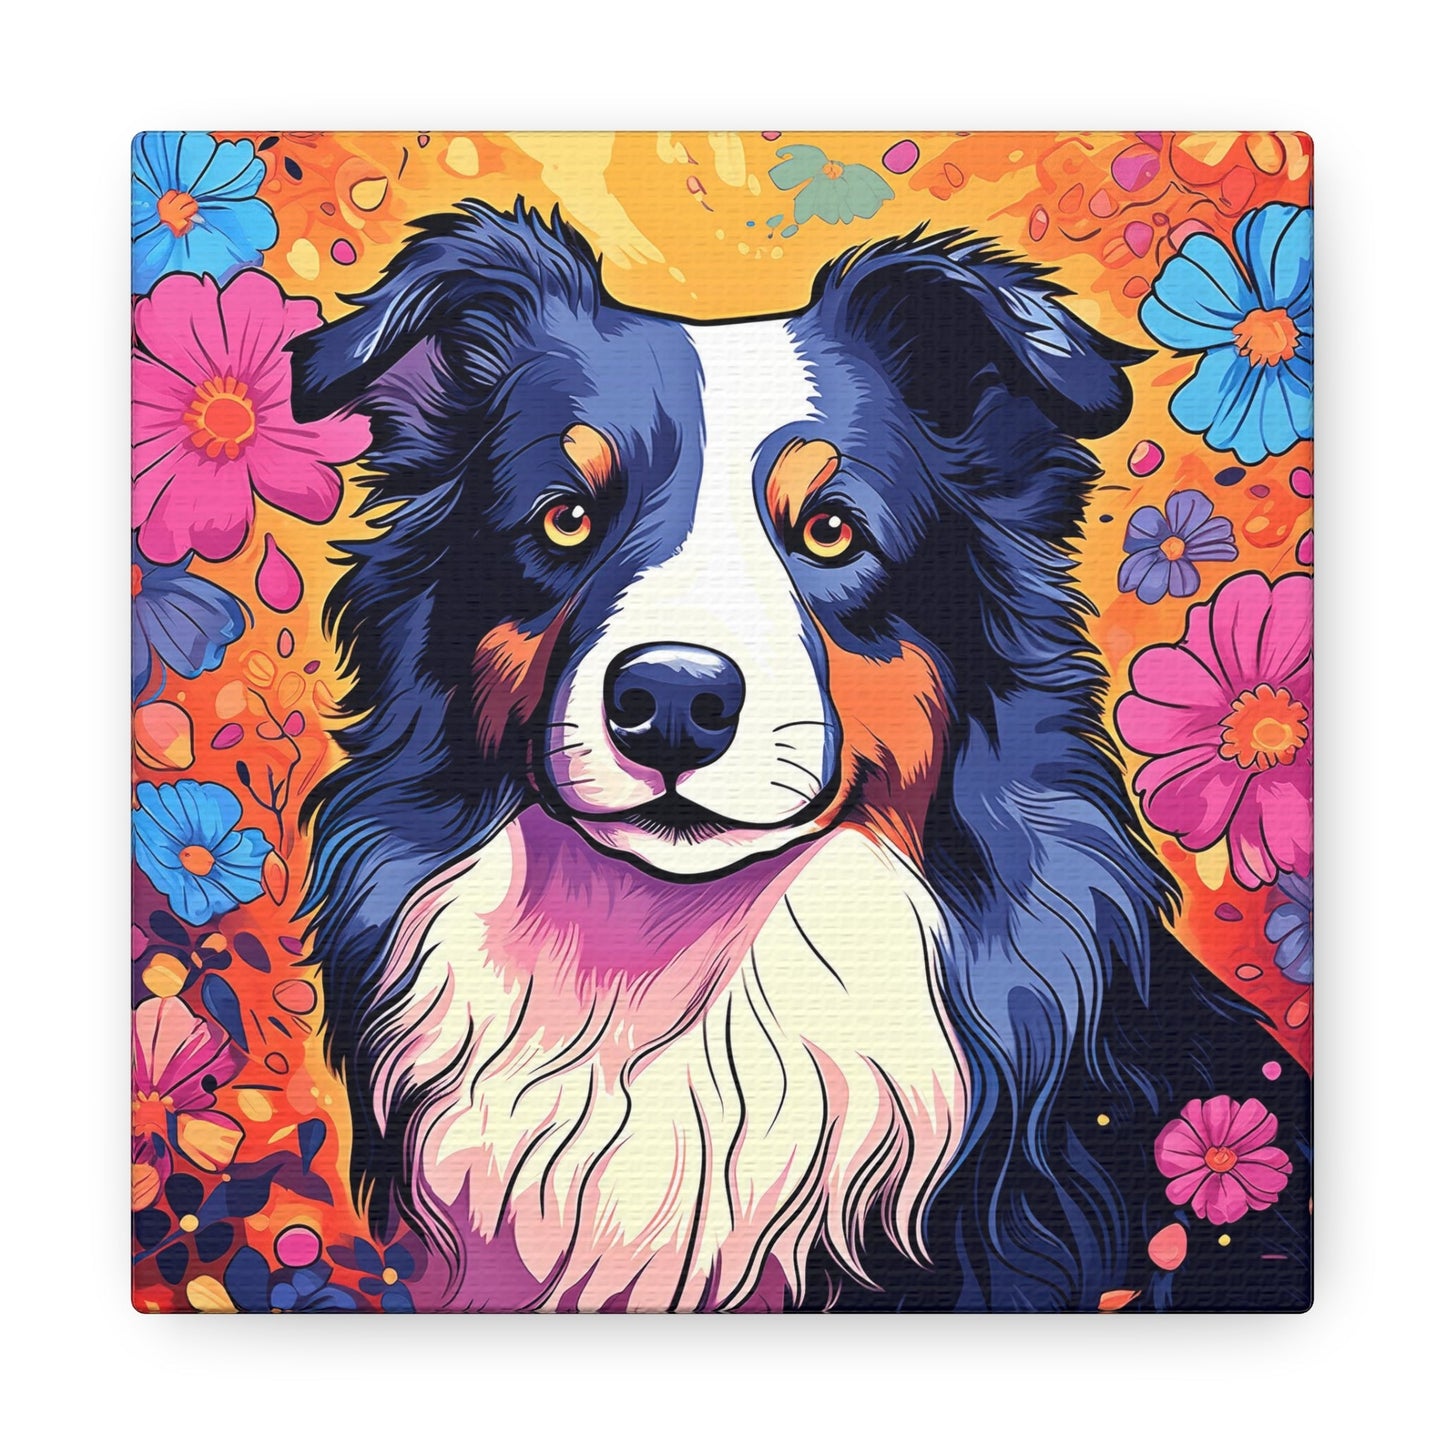 CrazyYetiClothing, CYC, Colorful Collie (Square Canvas Gallery Wrap), Canvas